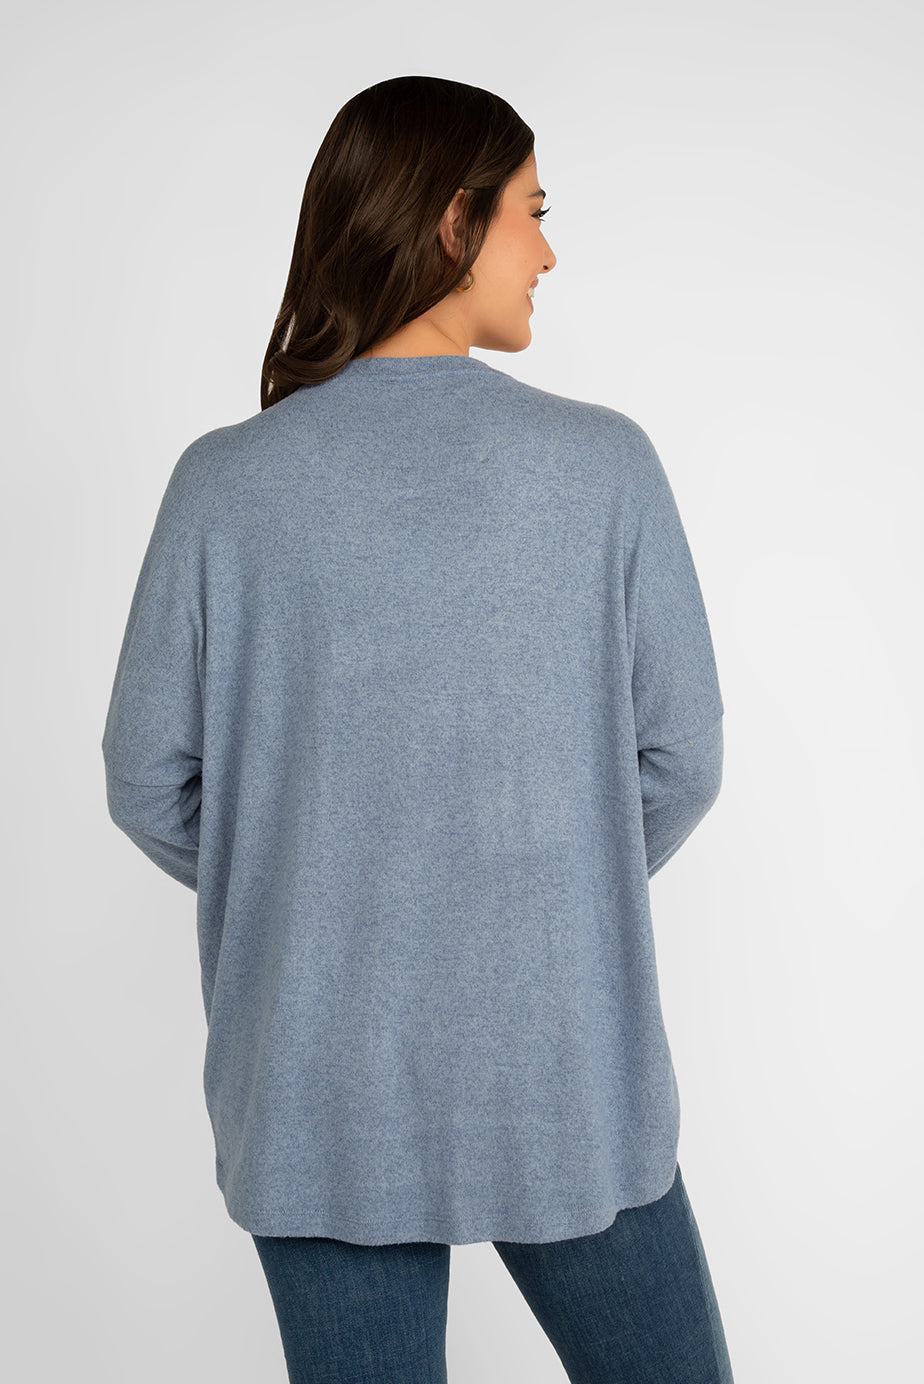 Soya Concept (24788S4) Women's Long Sleeve Brushed Knit Top in Blue